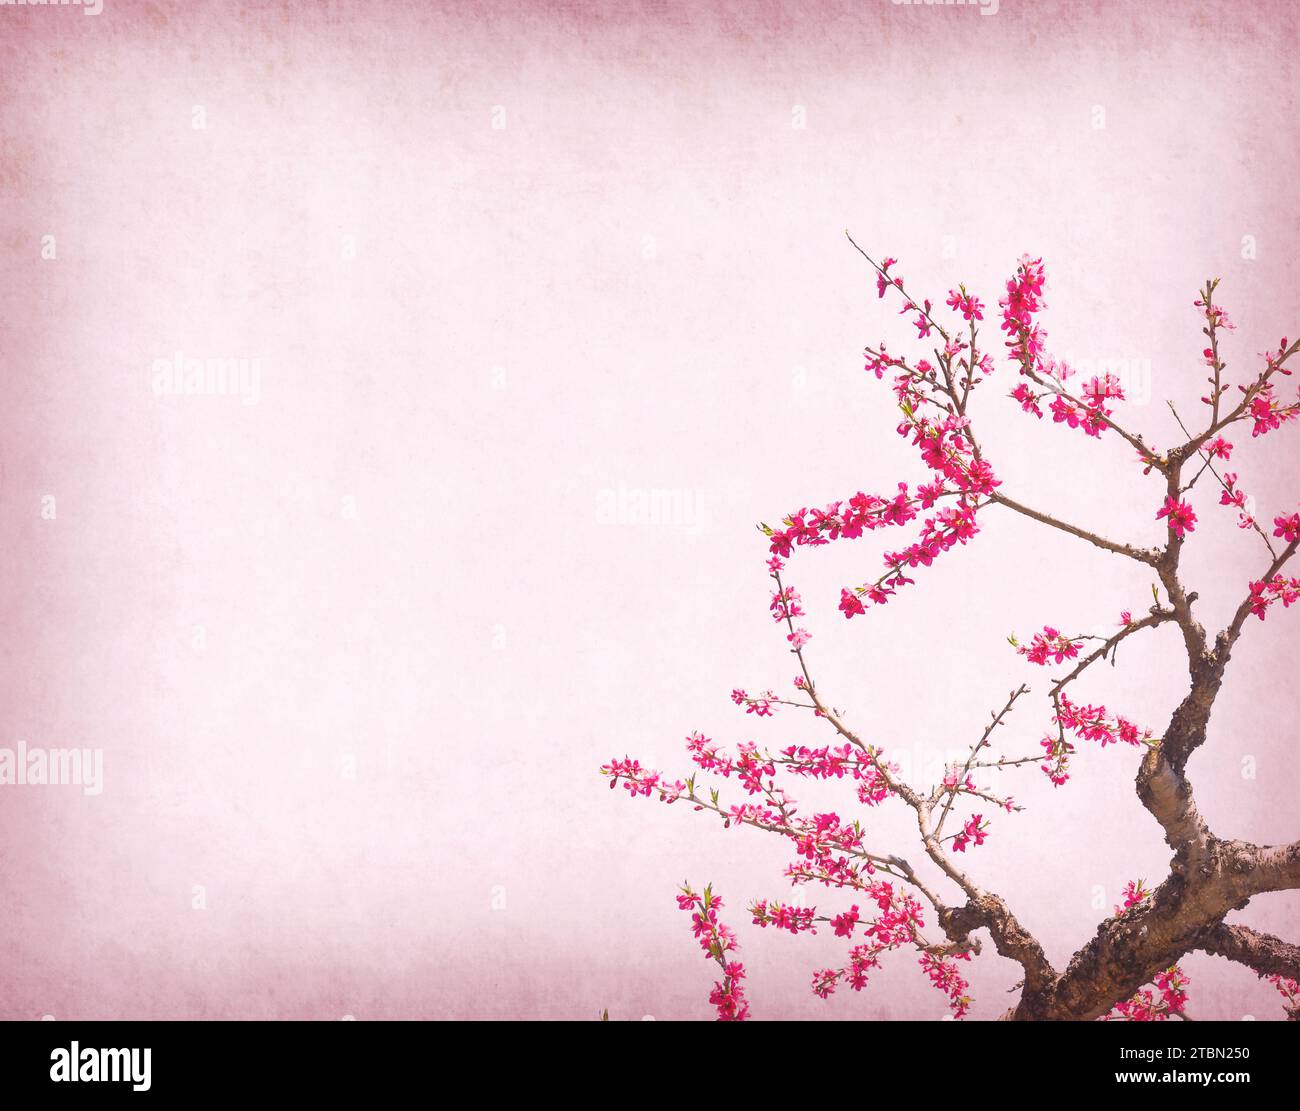 peach blossom on Old antique vintage paper background Stock Photo